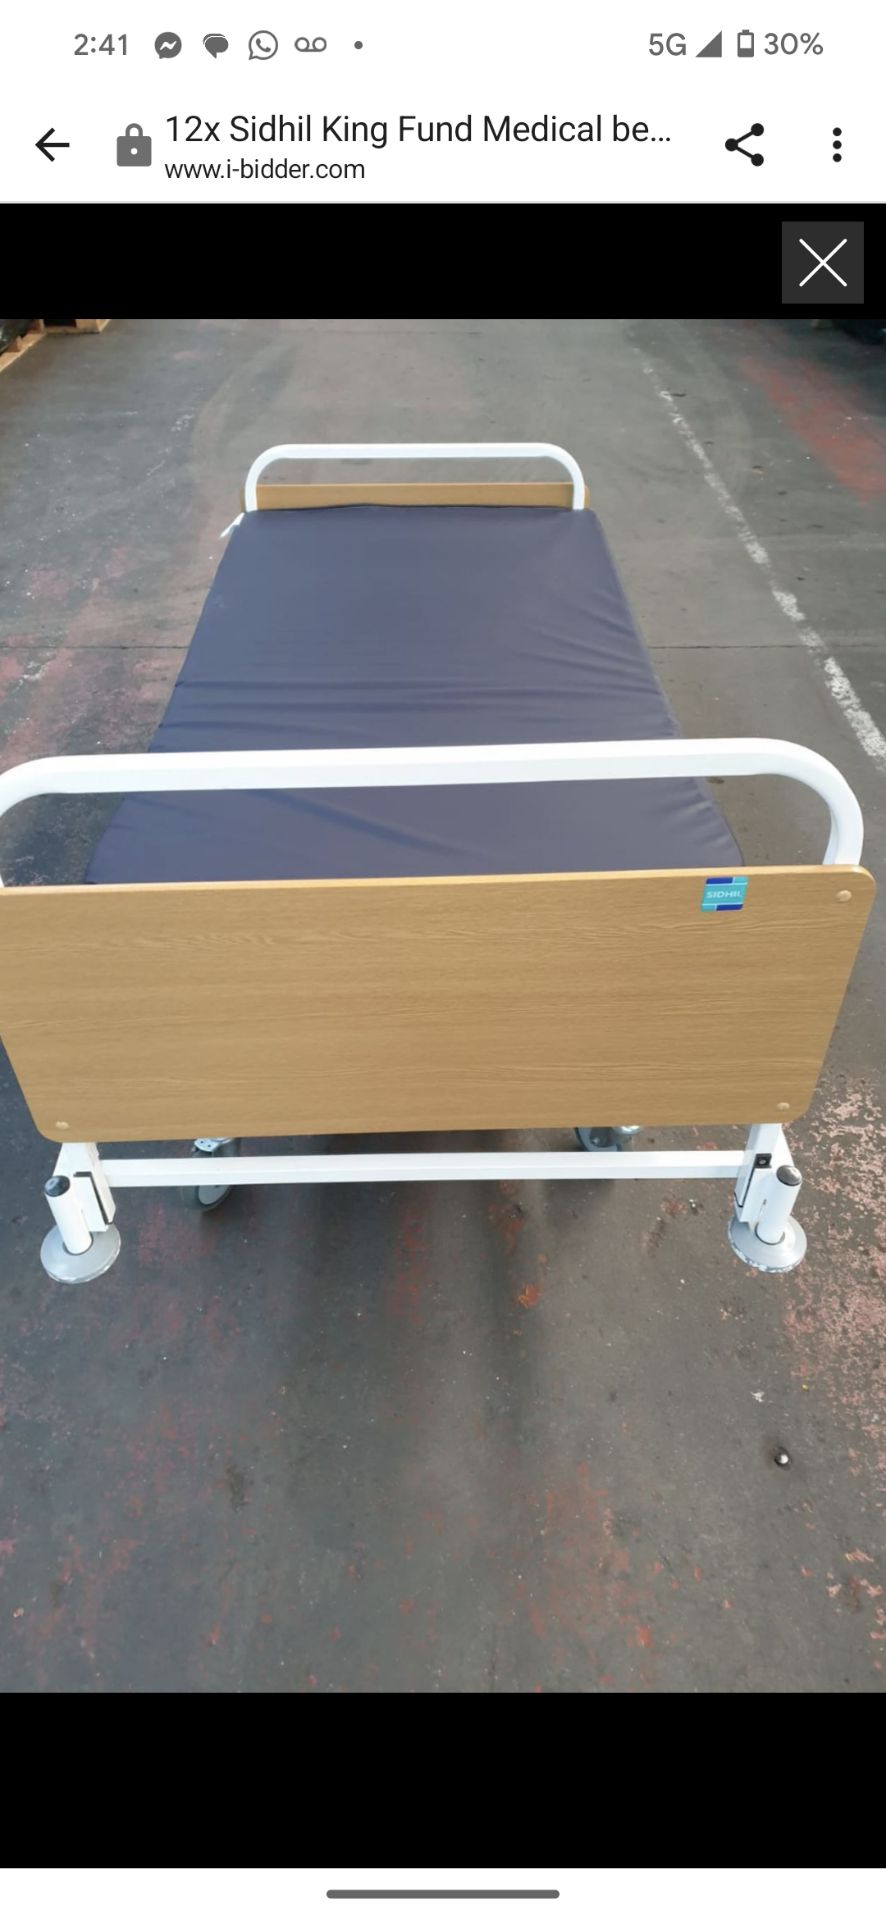 1 x Sidhil Kings Fund Hydraulic Hospital Bed With Mattress - Image 3 of 6